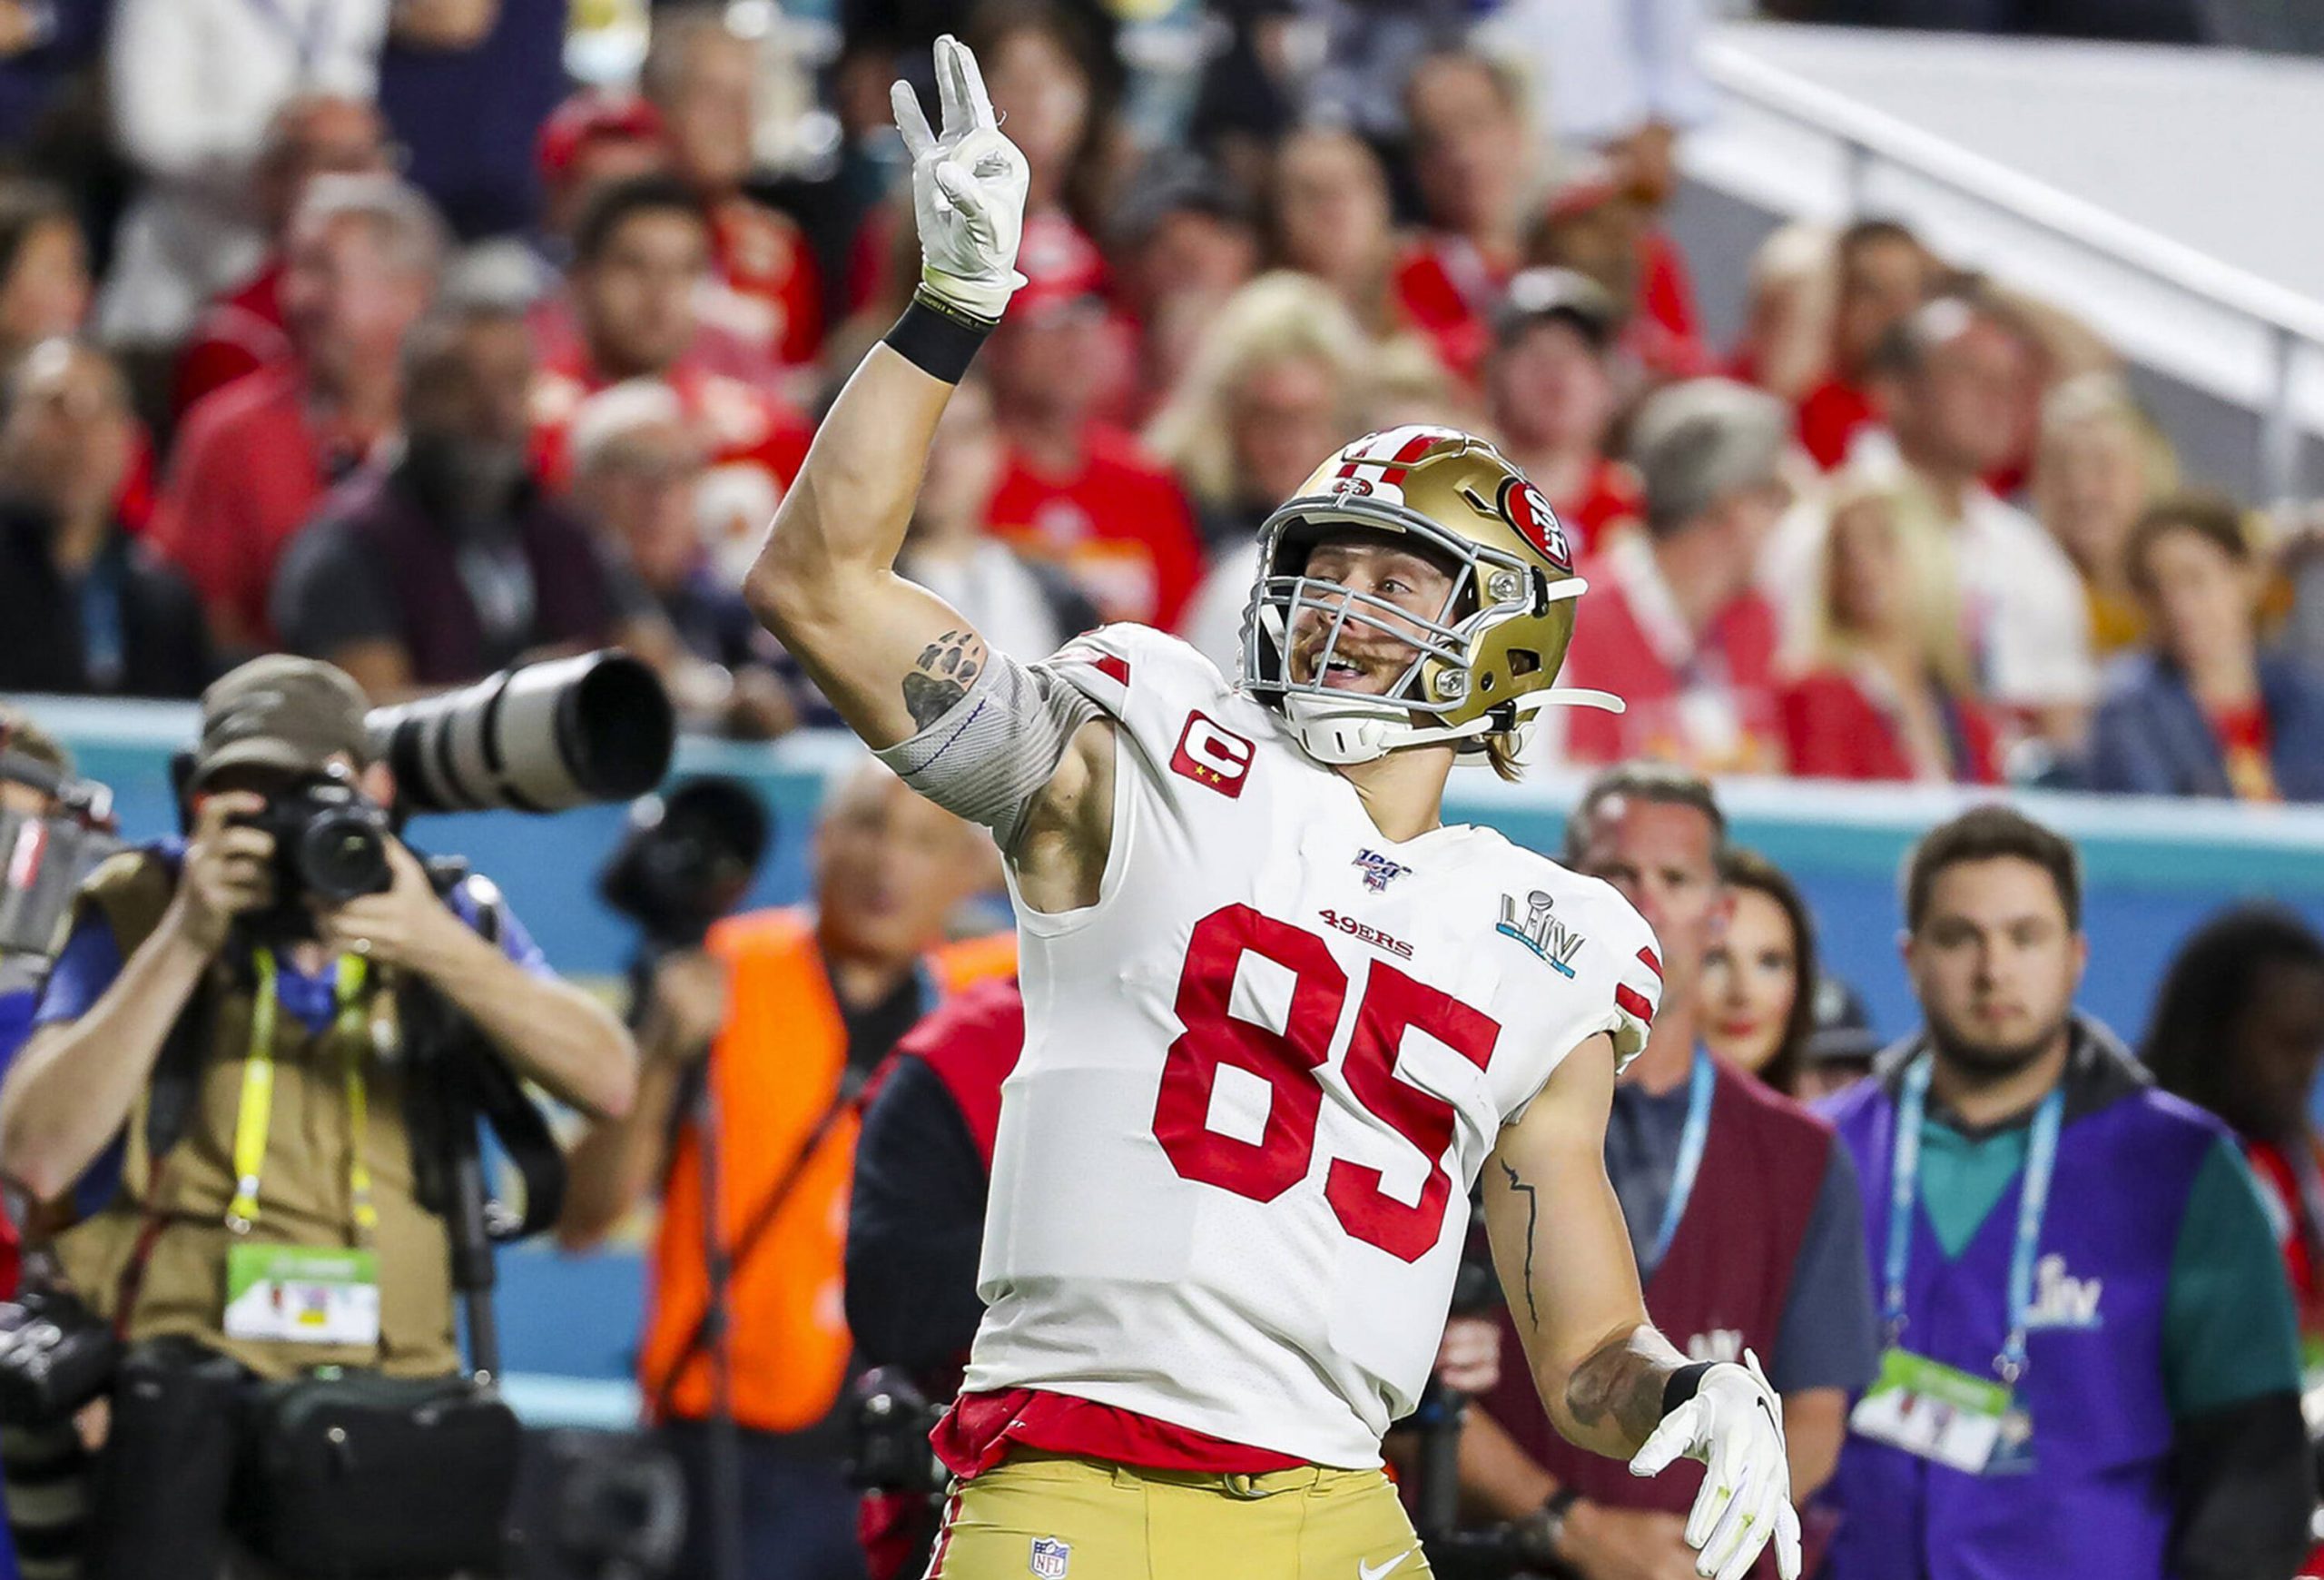 February 2, 2020, Miami Gardens, FL, USA: San Francisco 49ers tight end George Kittle 85 reacts after catching a first-half pass against the Kansas City Chiefs during Super Bowl LIV at Hard Rock Stadium in Miami Gardens, Fla., on Sunday, Feb. 2, 2020. Miami Gardens USA - ZUMAm67_ 20200202_zaf_m67_145 Copyright: xCharlesxTrainorxJrx